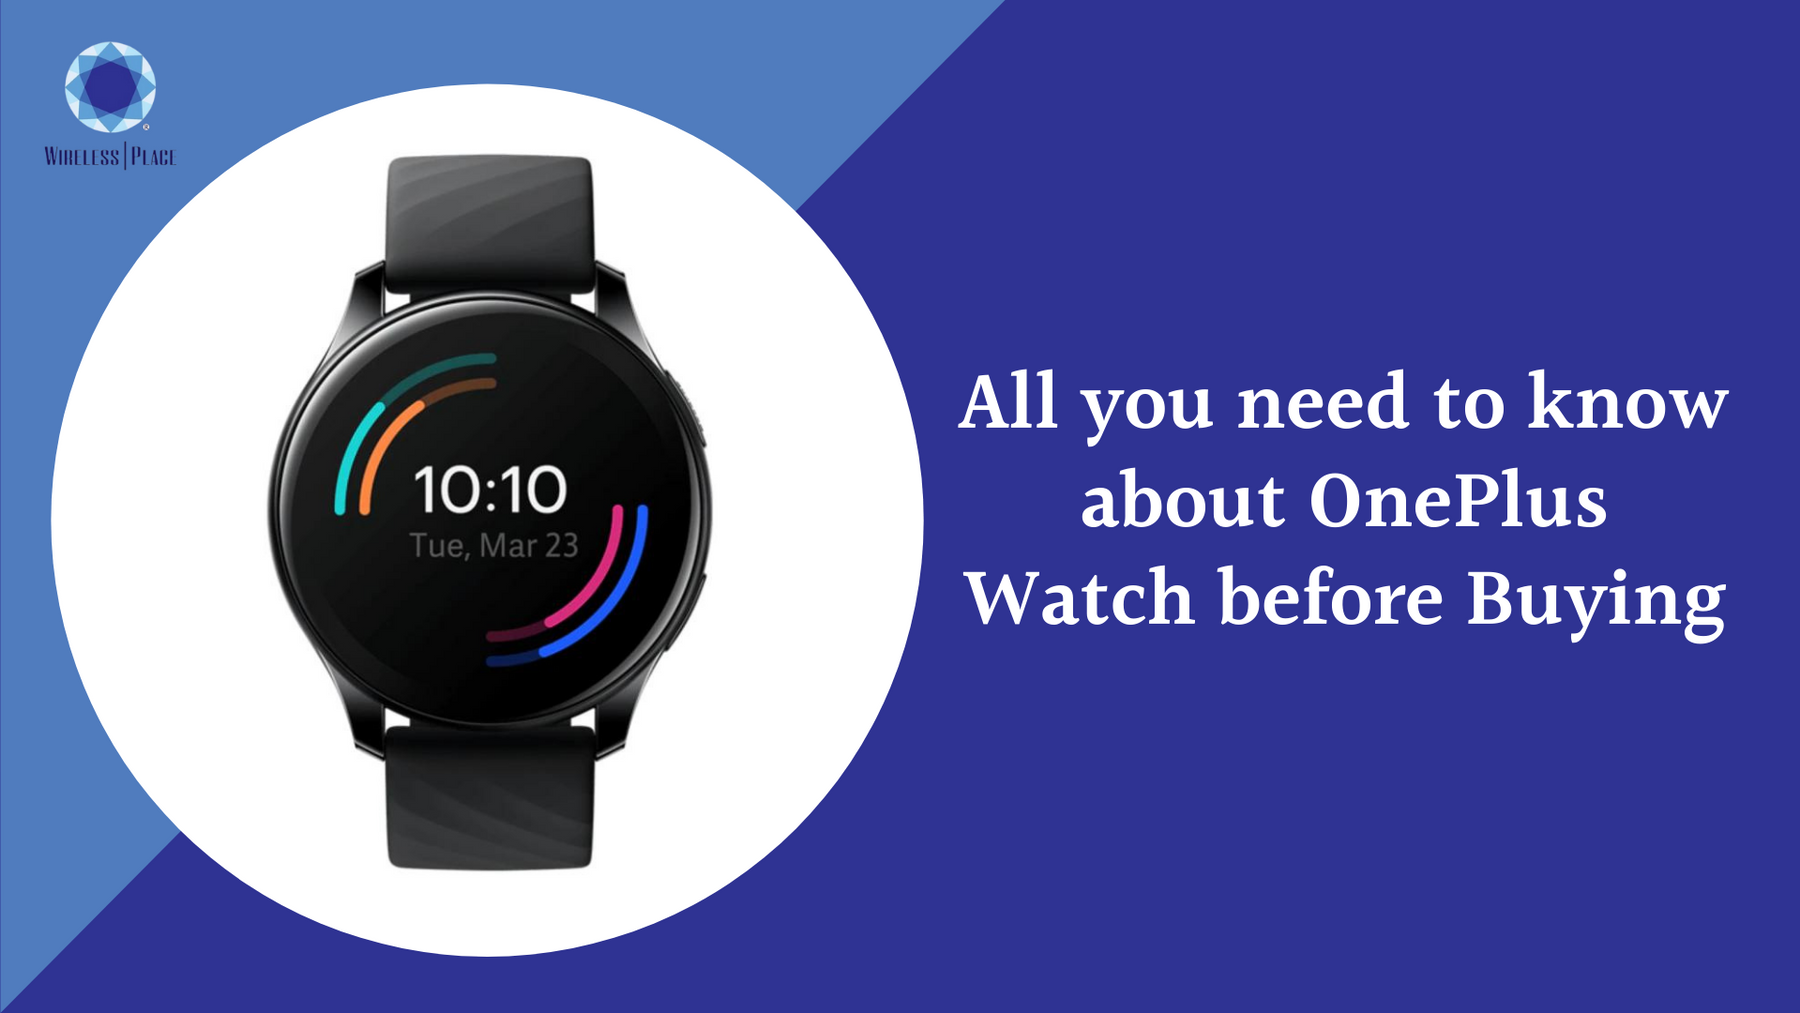 All you need to know about OnePlus Watch before Buying